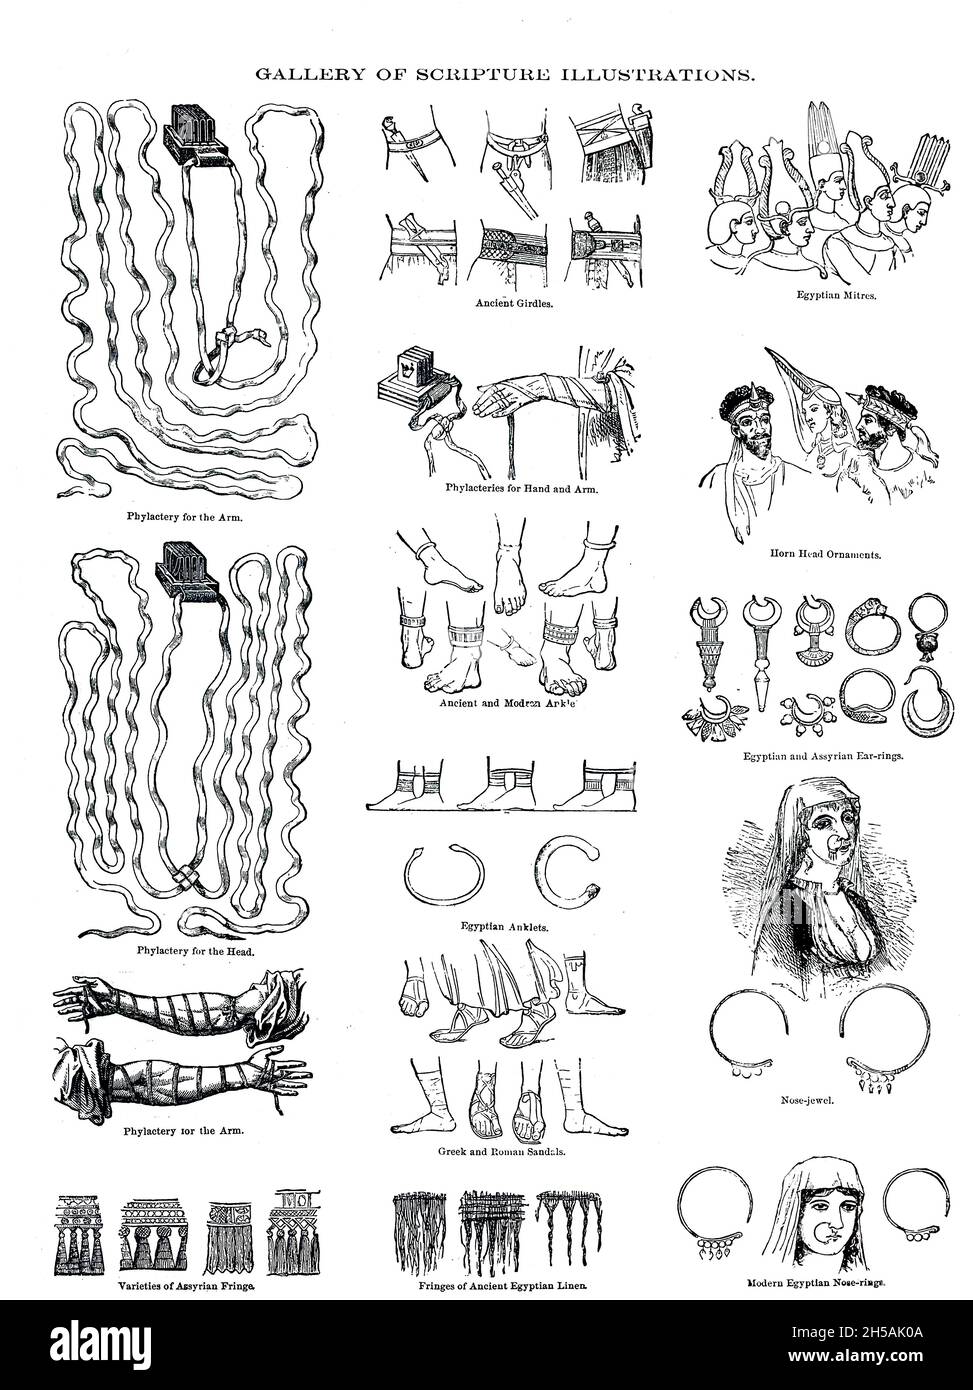 Gallery of Scripture Illustrations (including jewellery and Jewish Phylactery) from ' The Doré family Bible ' containing the Old and New Testaments, The Apocrypha Embellished with Fine Full-Page Engravings, Illustrations and the Dore Bible Gallery. Published in Philadelphia by William T. Amies in 1883 Stock Photo